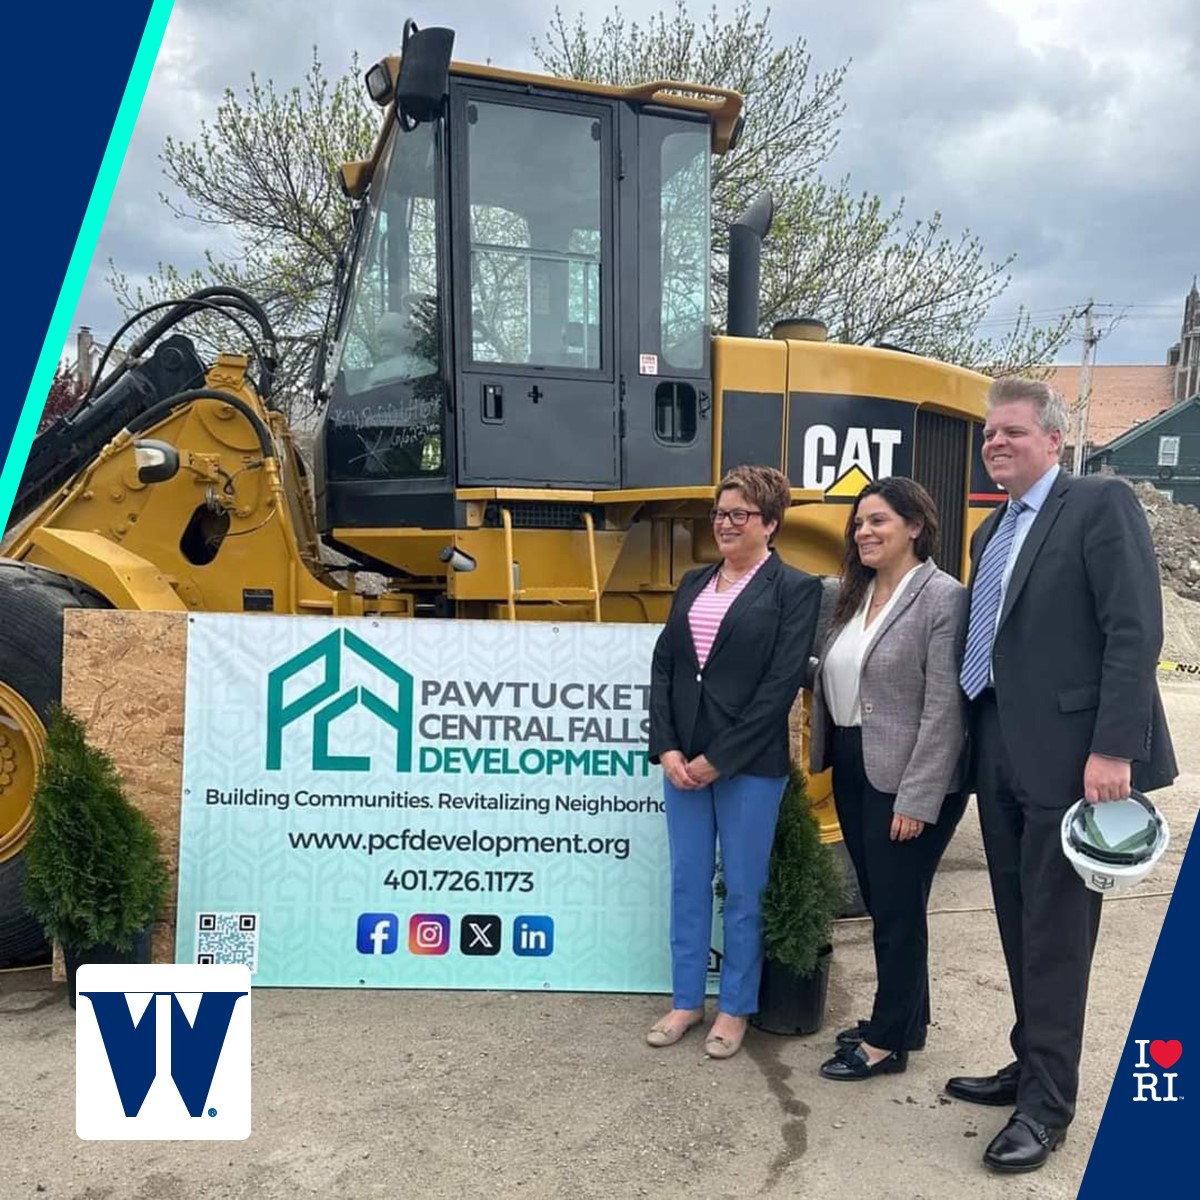 Congratulations to our partners @PCF_Development for groundbreaking their Central Street Development. We are proud to support their work to provide access to #affordablehousing and important services right in Pawtucket and Central Falls! __ What we value is you.™ #WashTrust